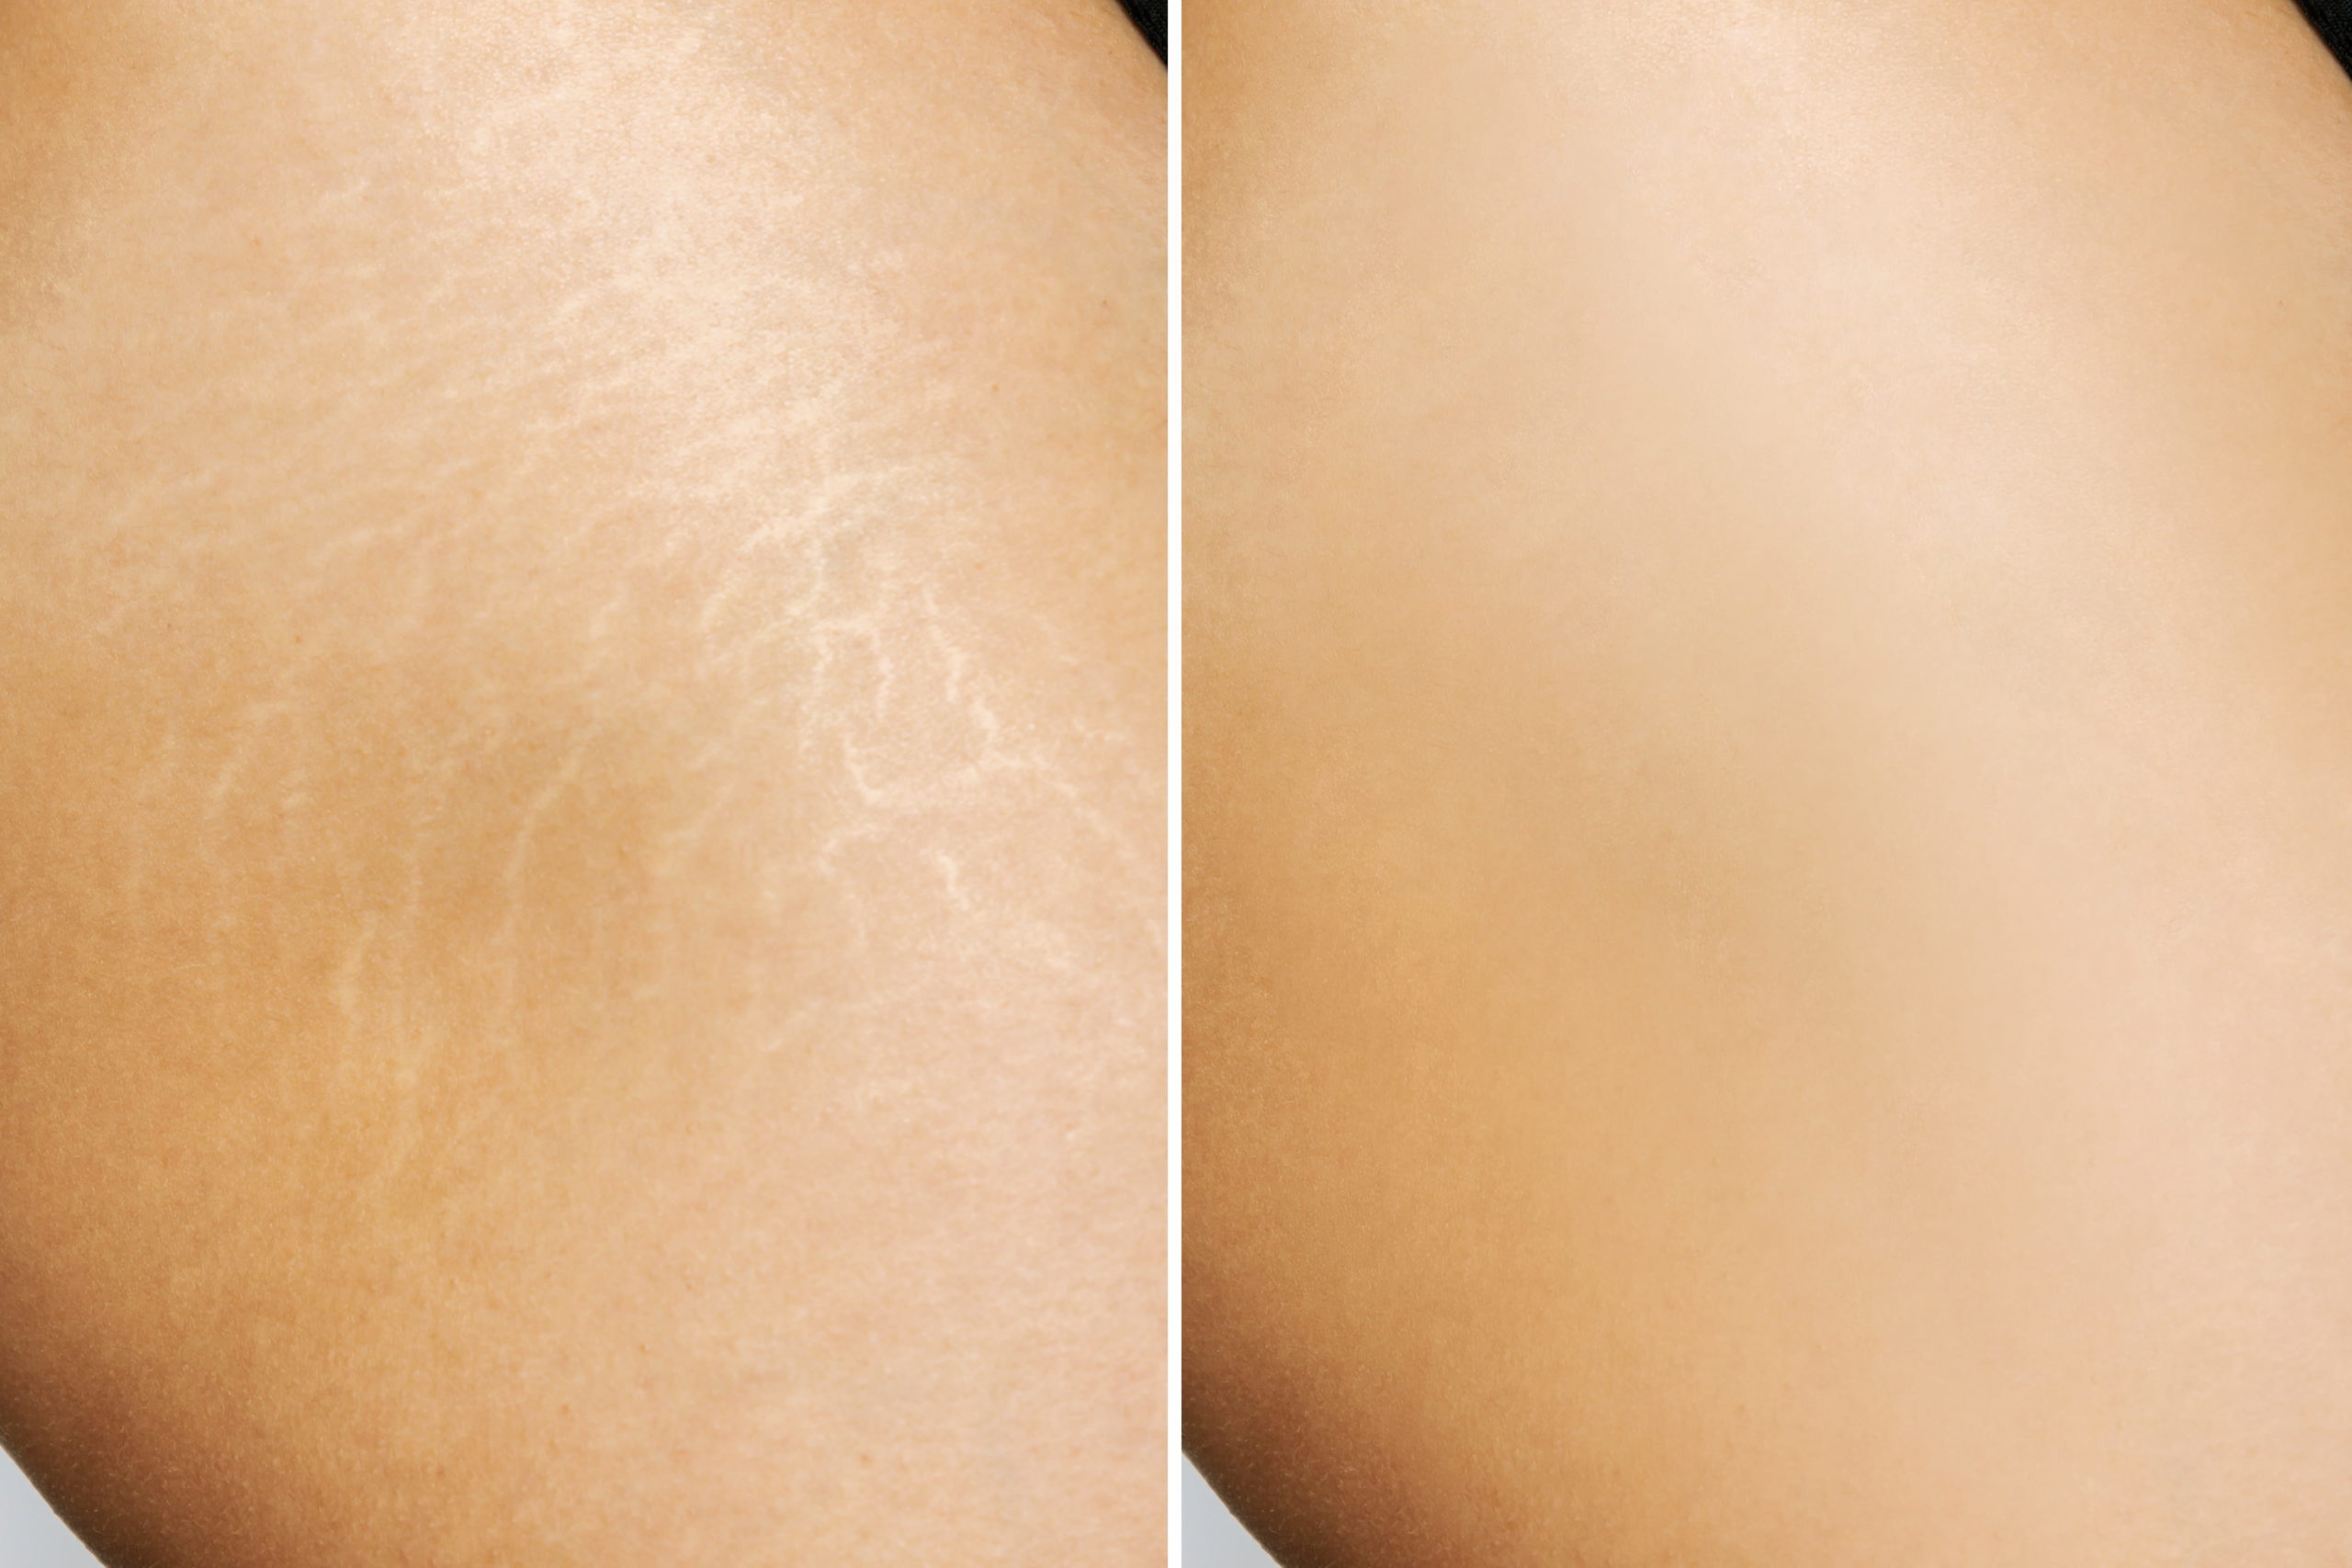 Stretch Marks Removal Before & after Treatment in Idaho Falls, ID By Bella Jade Medspa